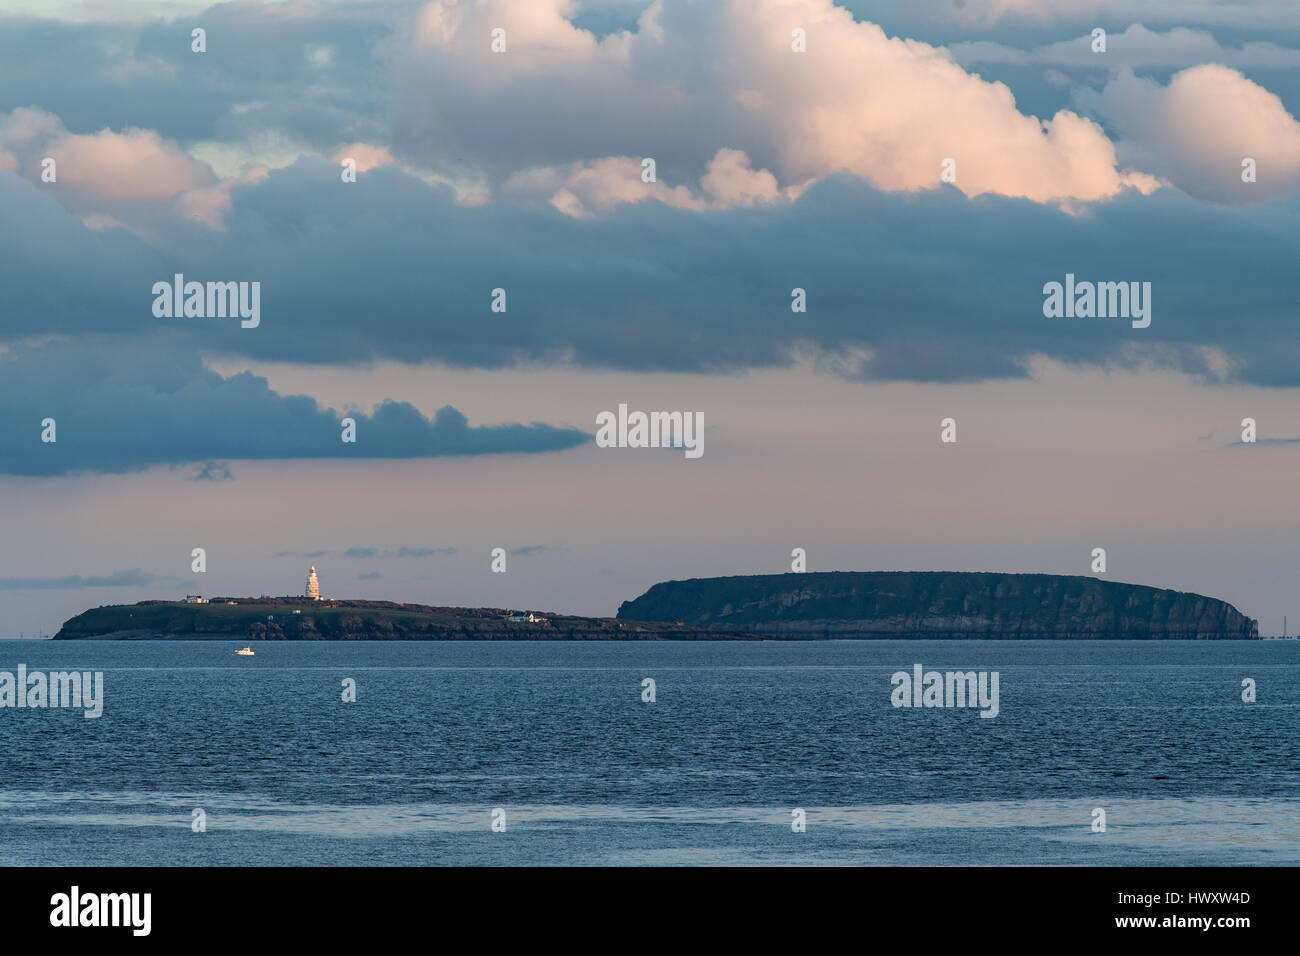 A view from the Cardiff Bay barrage towards Flat Holm (left) and Steep Holm (right) islands in the Bristol Channel. Stock Photo